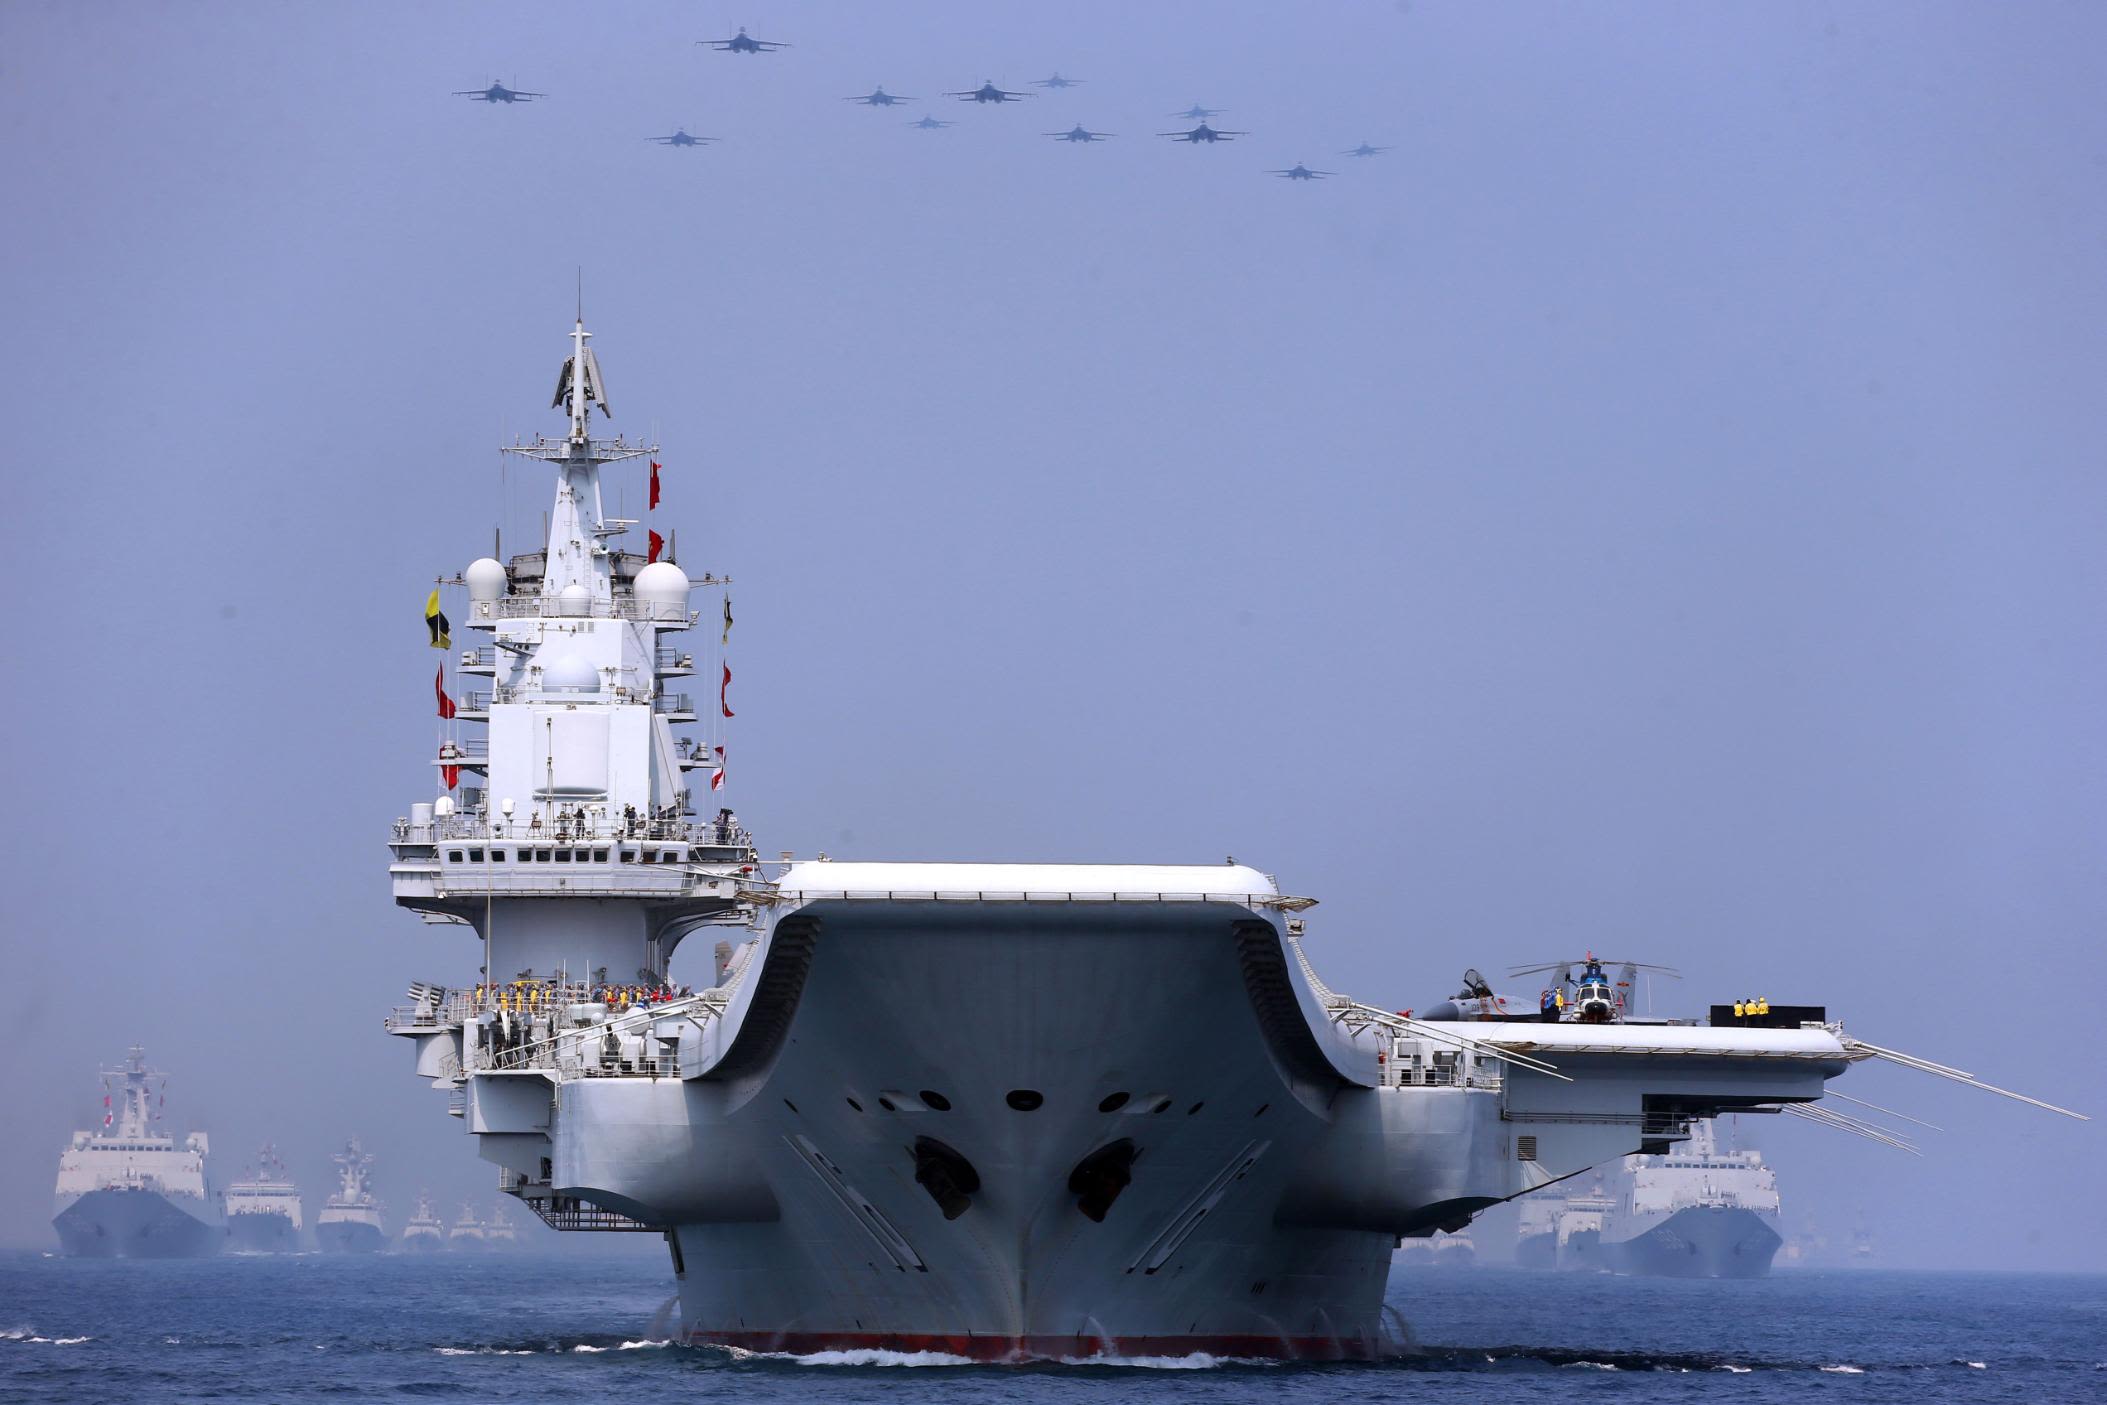 Three US Navy aircraft carriers are patrolling the Pacific Ocean